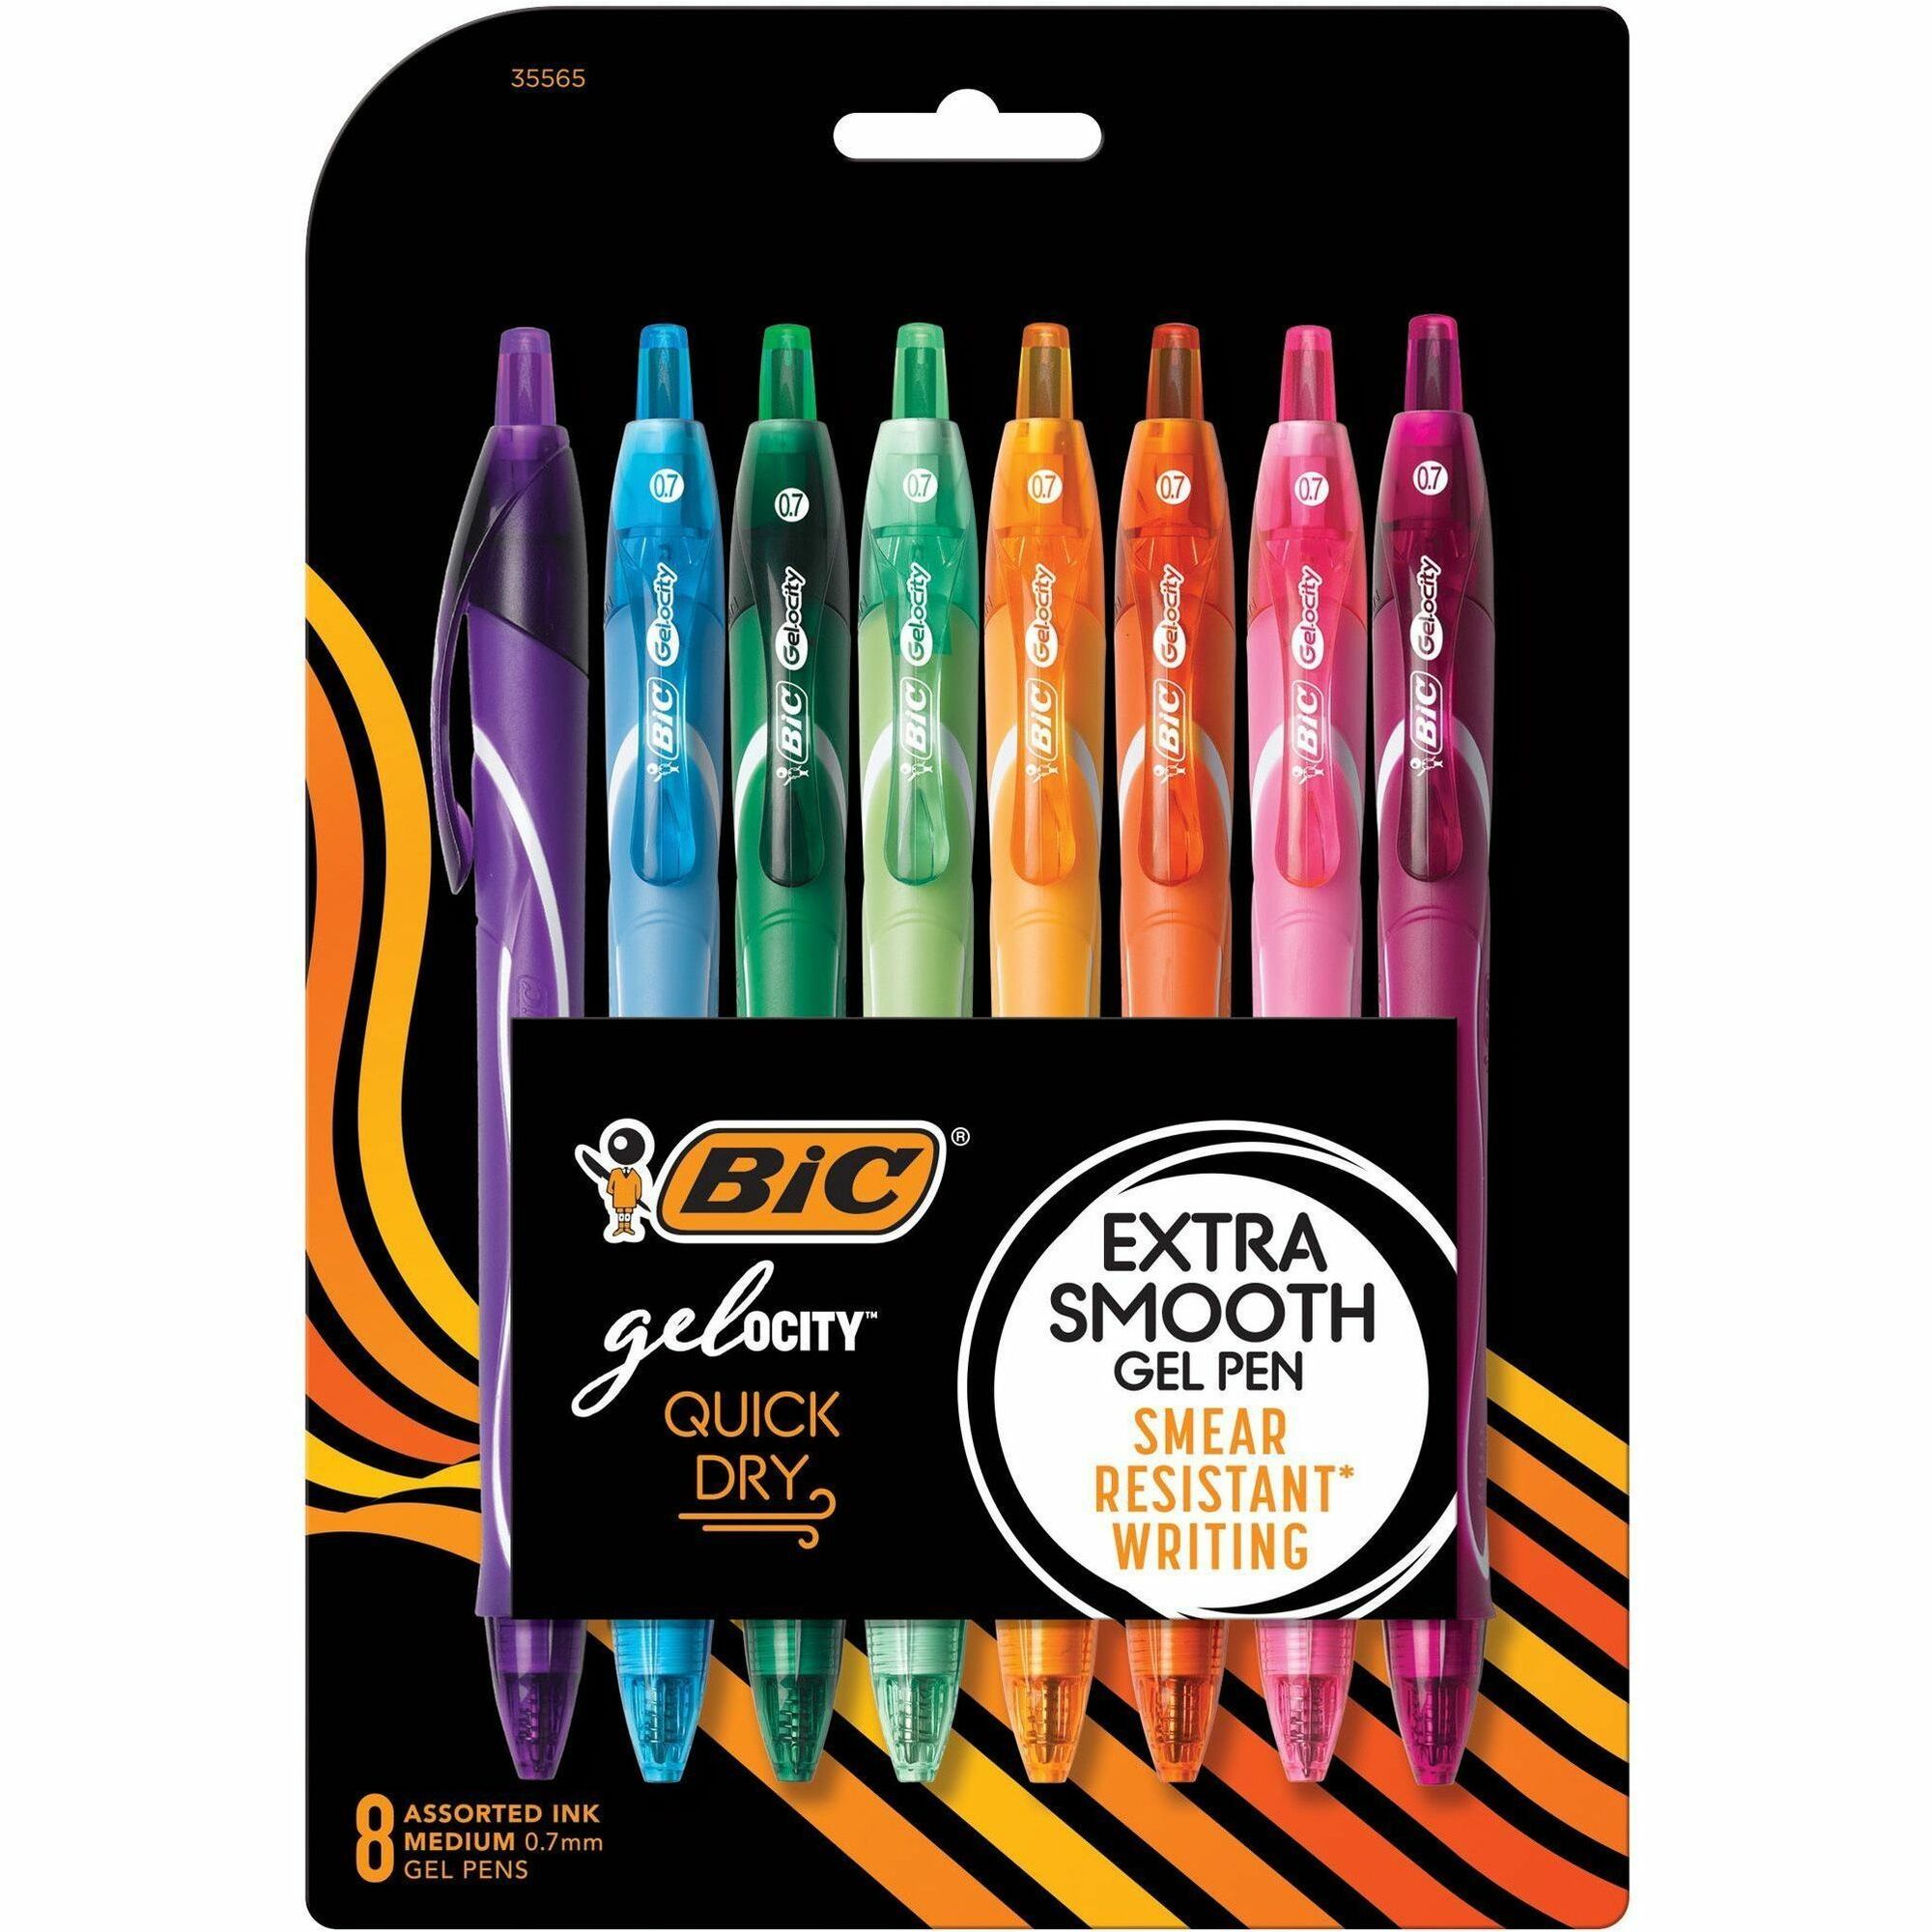 Bic Stationery Sets Pens, Pencils, White board Markers, Gel Pens,  Highlighters